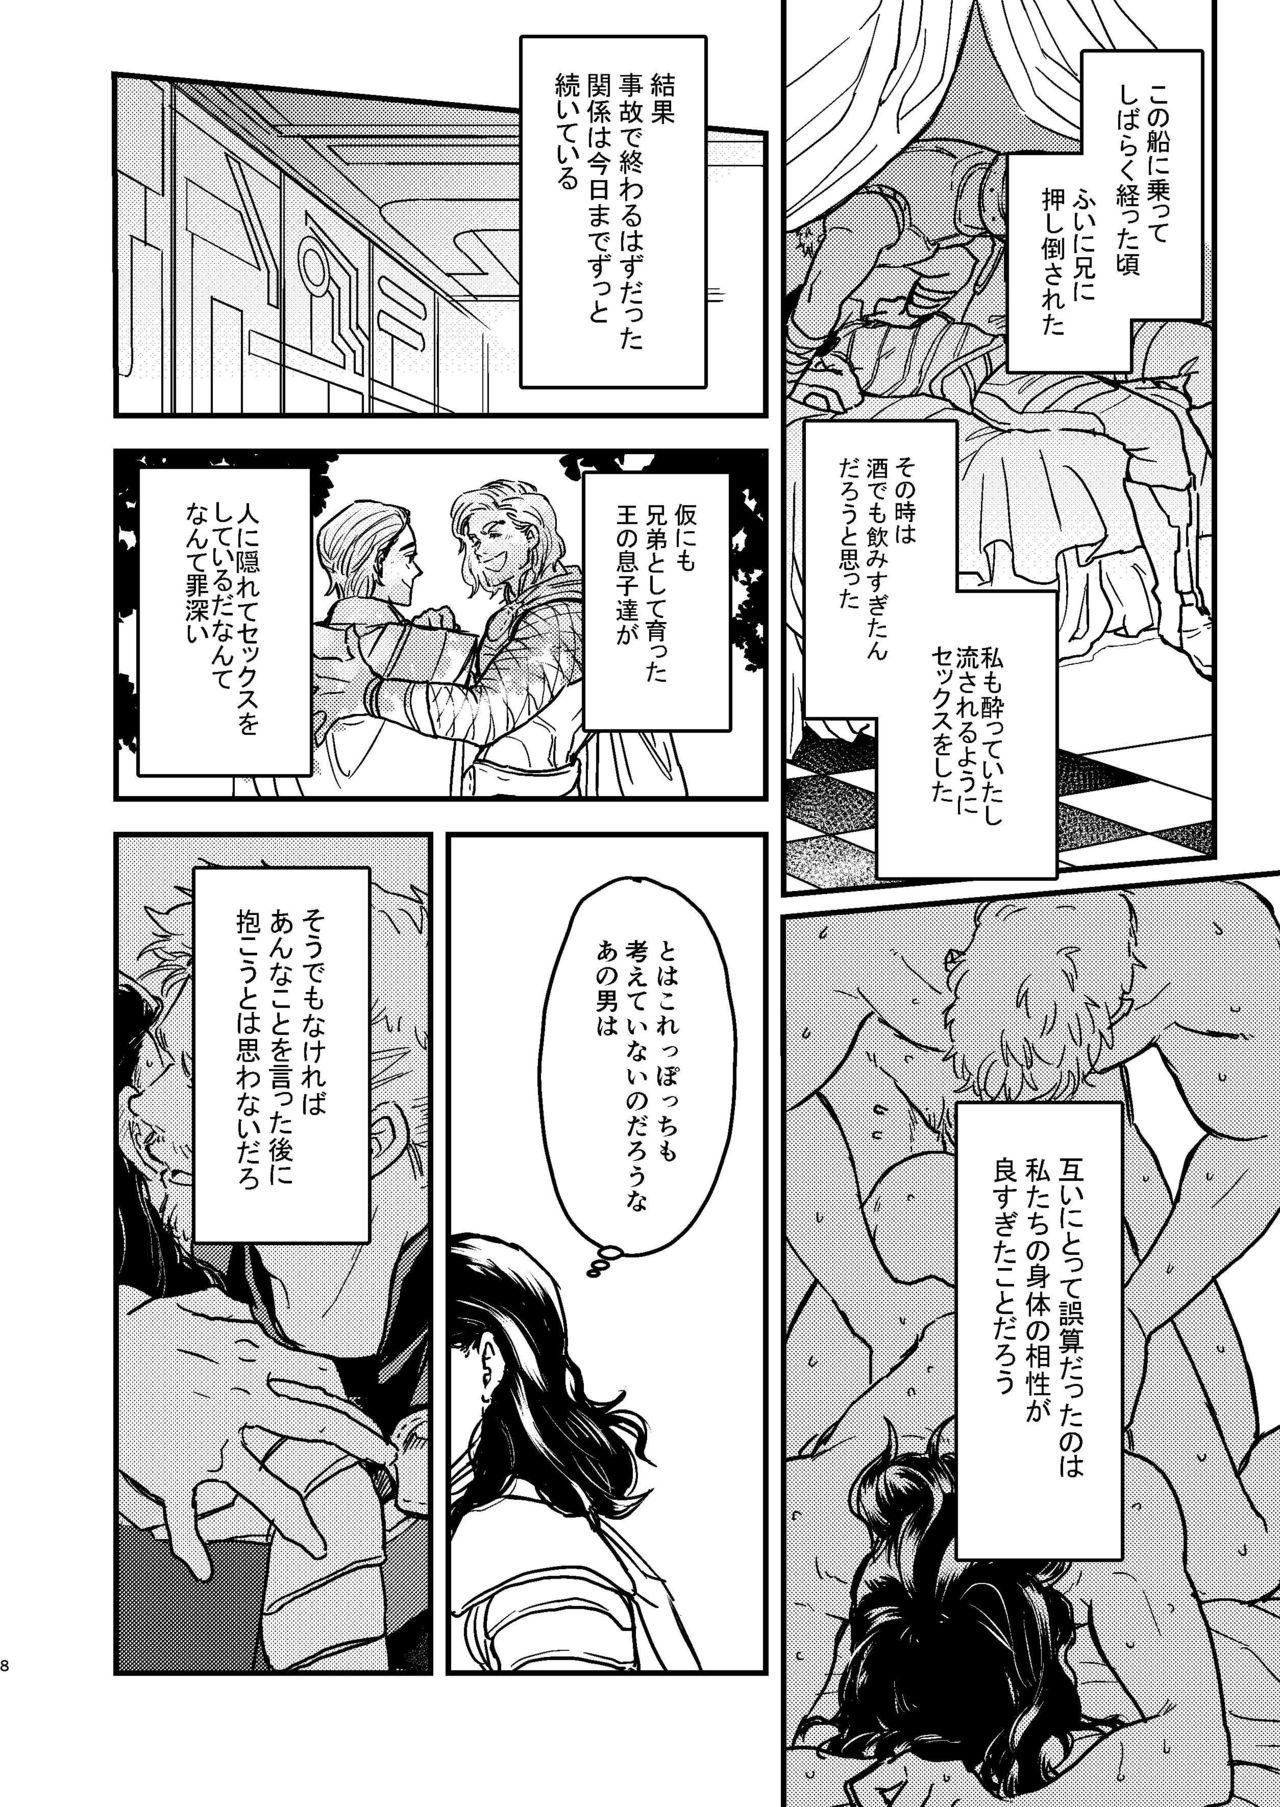 Best Blow Jobs Ever Sore o Nanto Yobebaii - What should I call it? - Avengers Fuck For Money - Page 9